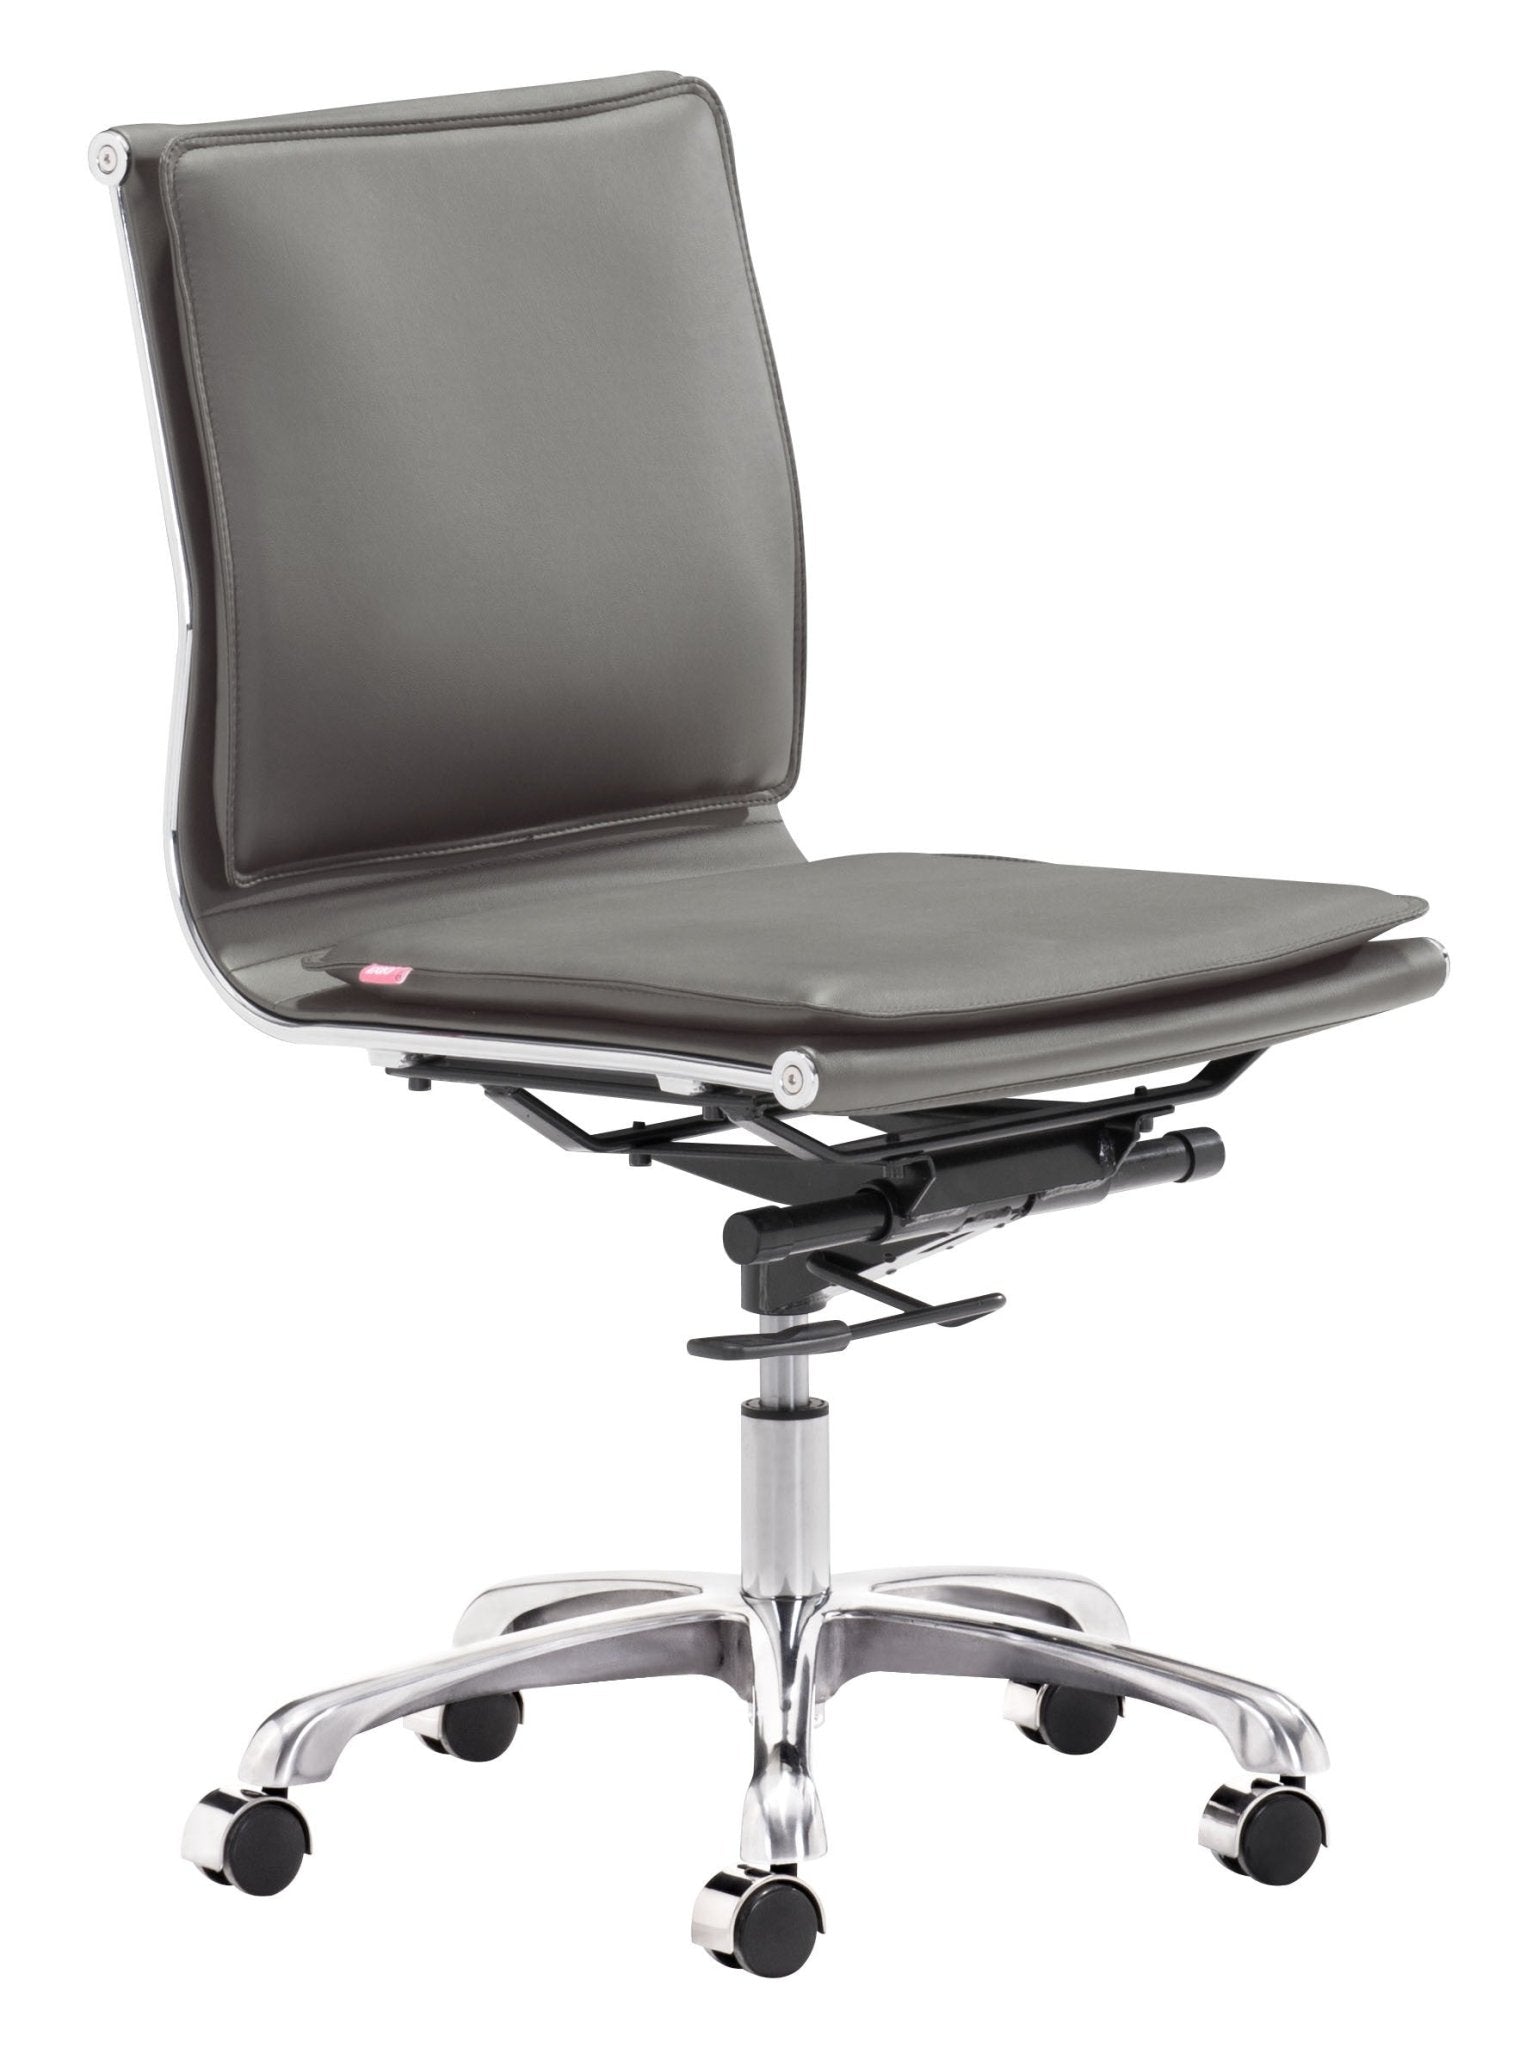 Gray-and-Silver-Adjustable-Swivel-Metal-Rolling-Executive-Office-Chair-Office-Chairs